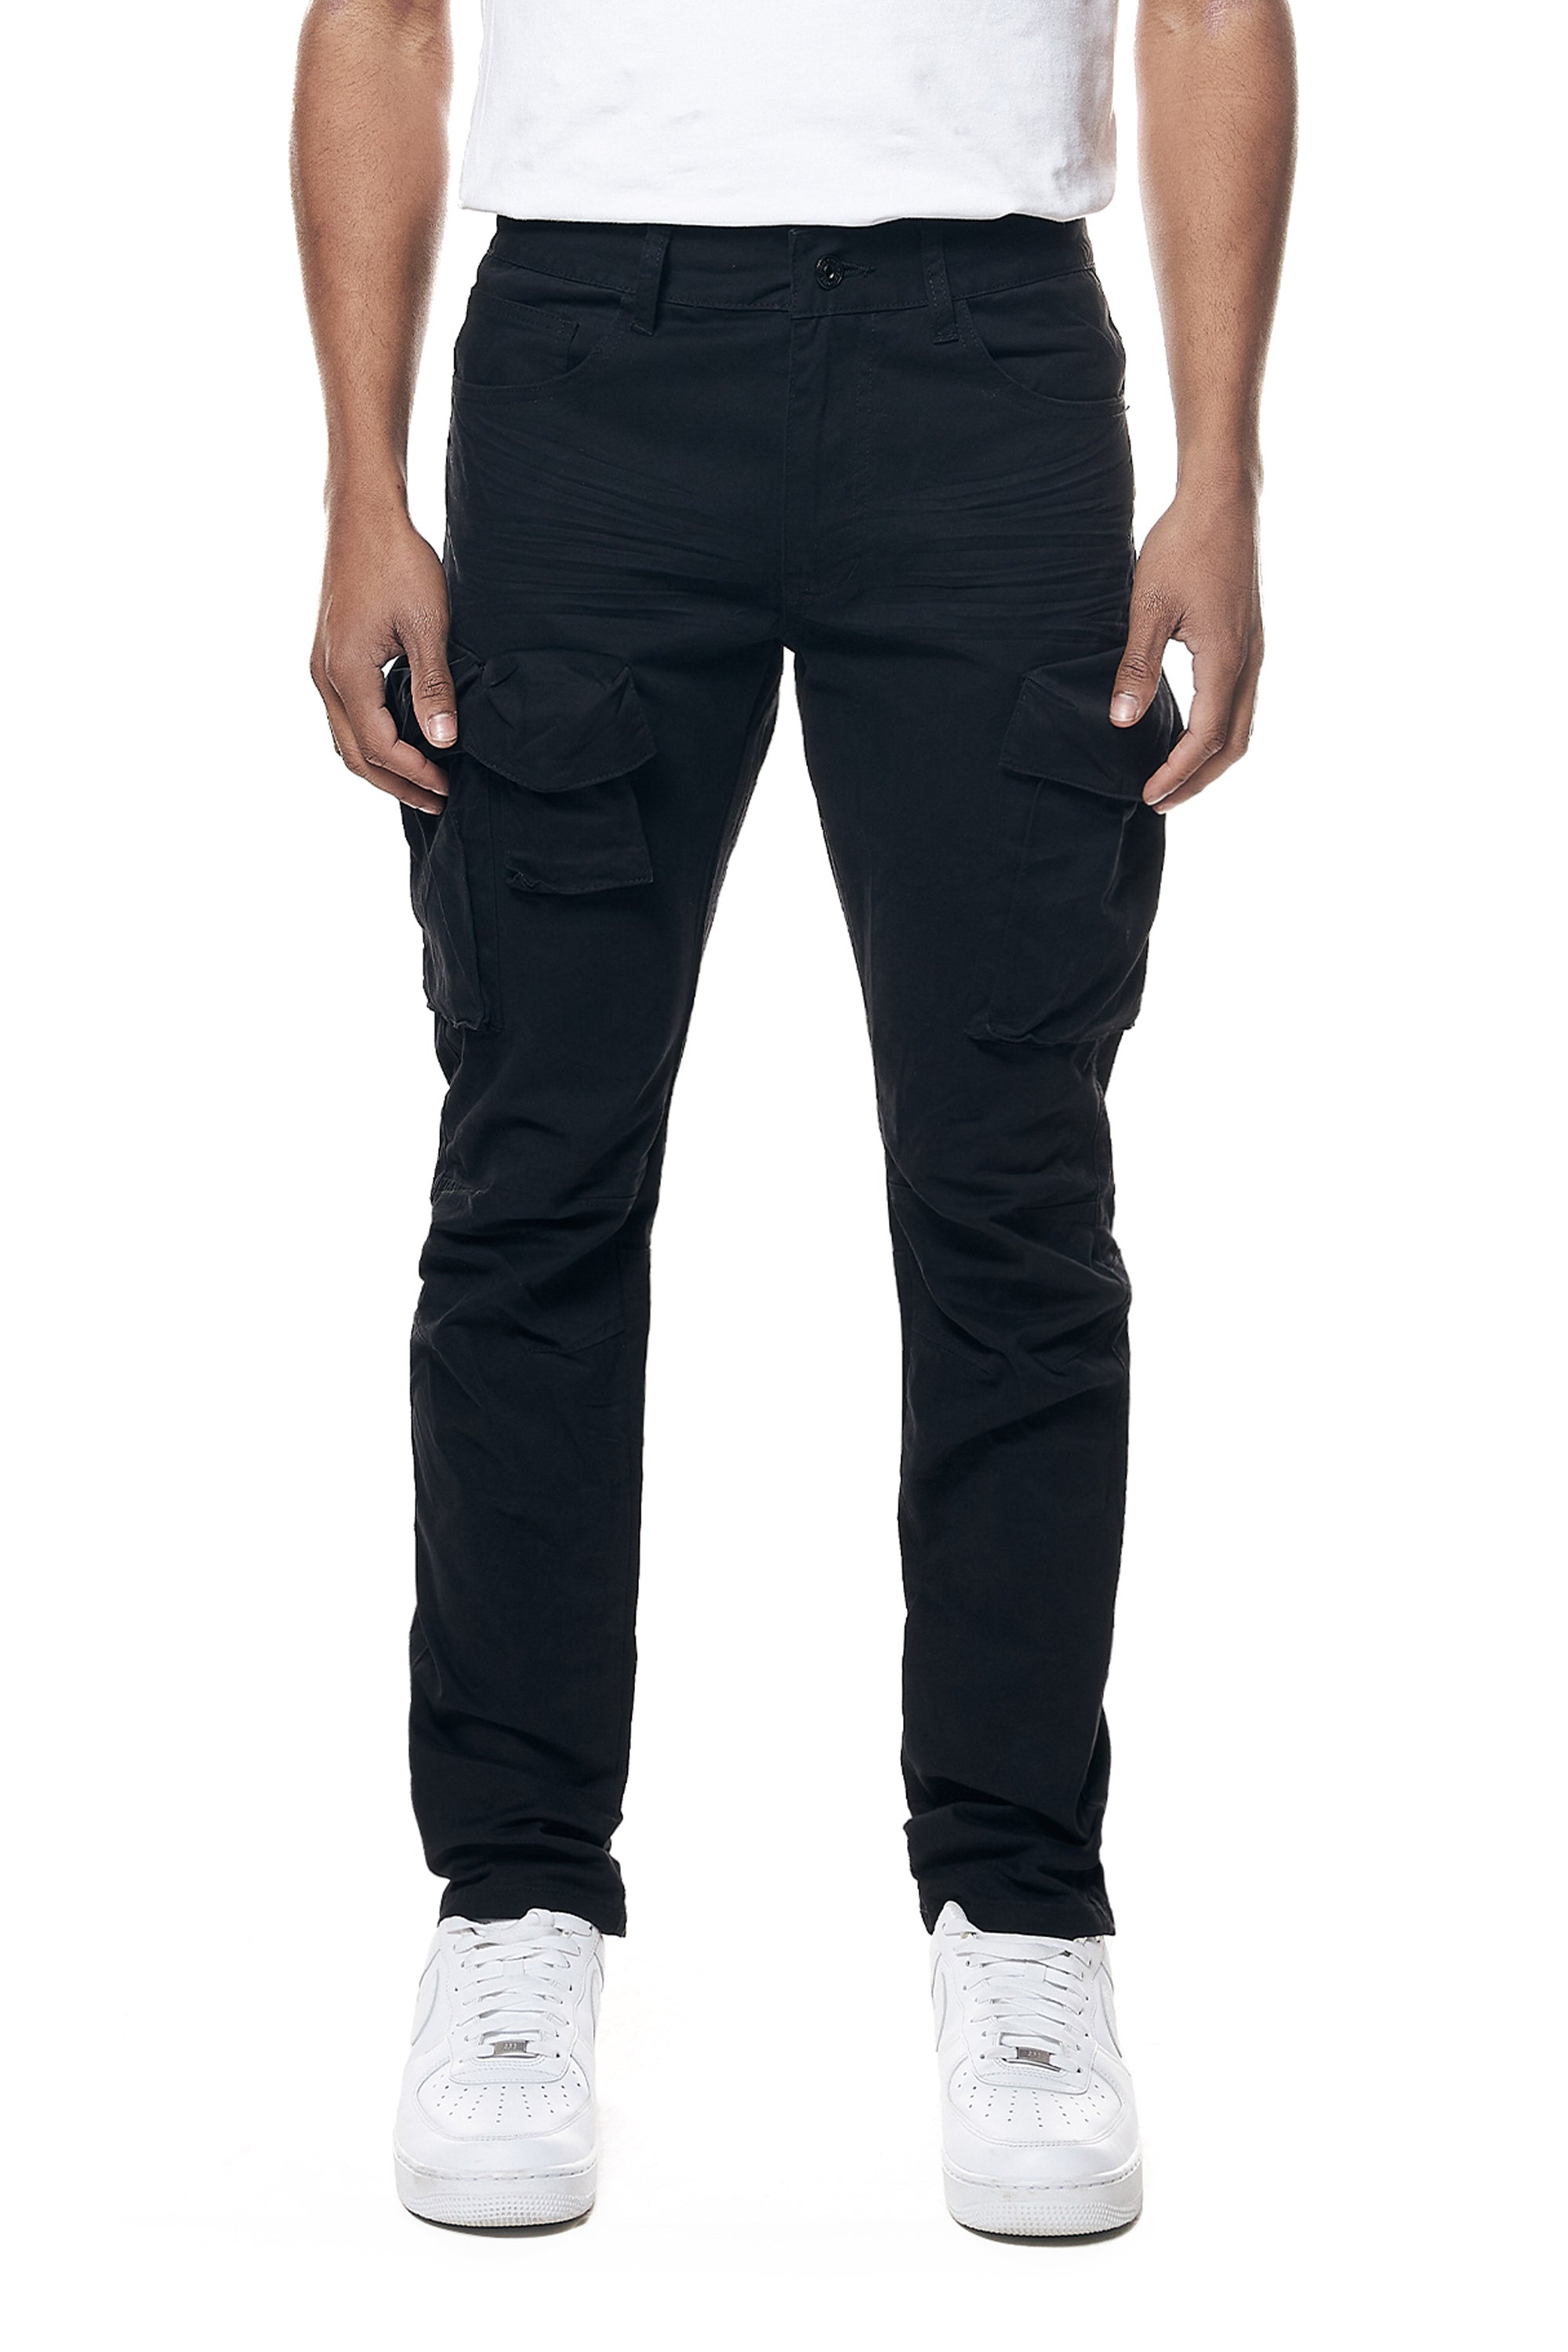 Men Cotton Twill Cargo Pant, Slim Fit at Rs 230/piece in Surat